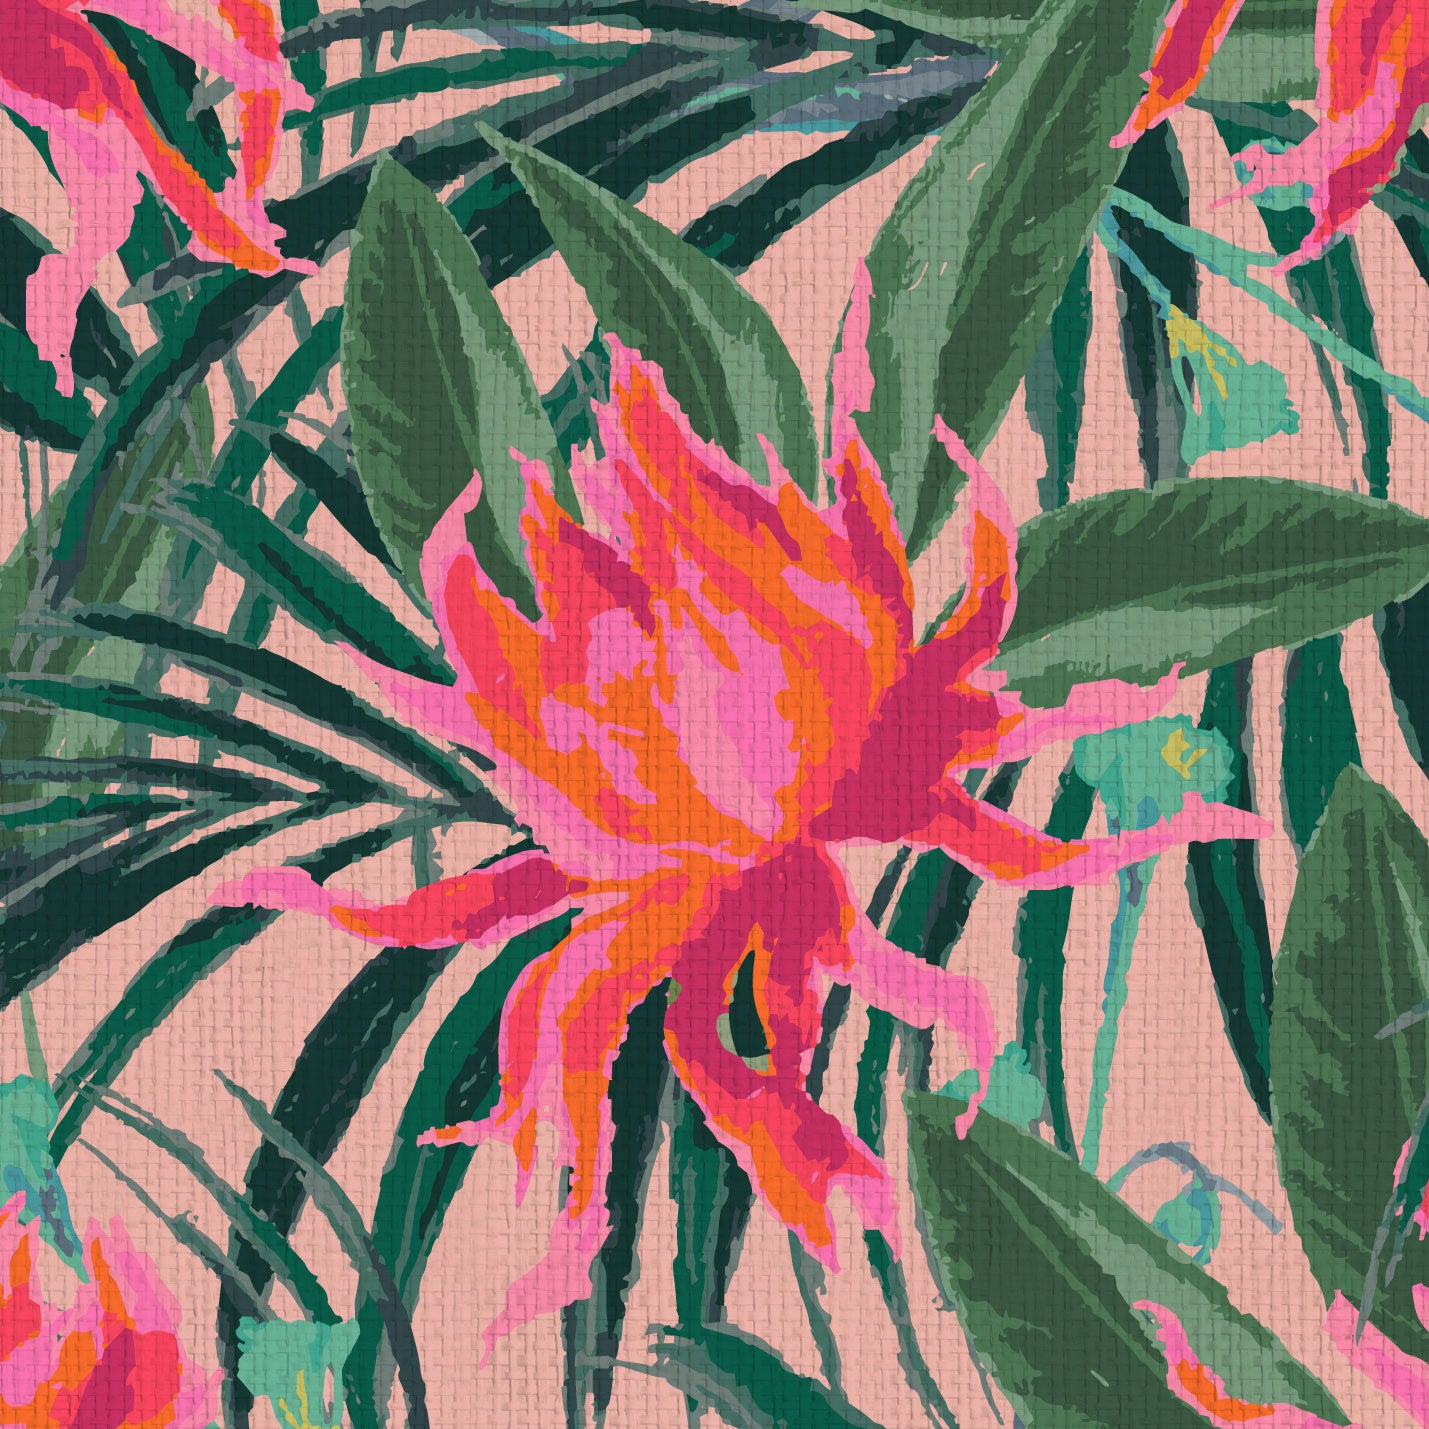 wallpaper with light pink based featuring oversized painterly tropical flowers and palm leafs in striking shades of pink and leafs in shades of deep green Natural Textured Eco-Friendly Non-toxic High-quality Sustainable Interior Design Bold Custom Tailor-made Retro chic Tropical Jungle Coastal preppy Garden Seaside Coastal Seashore Waterfront Vacation home styling Retreat Relaxed beach vibes Beach cottage Shoreline Oceanfront botanical palm leaf